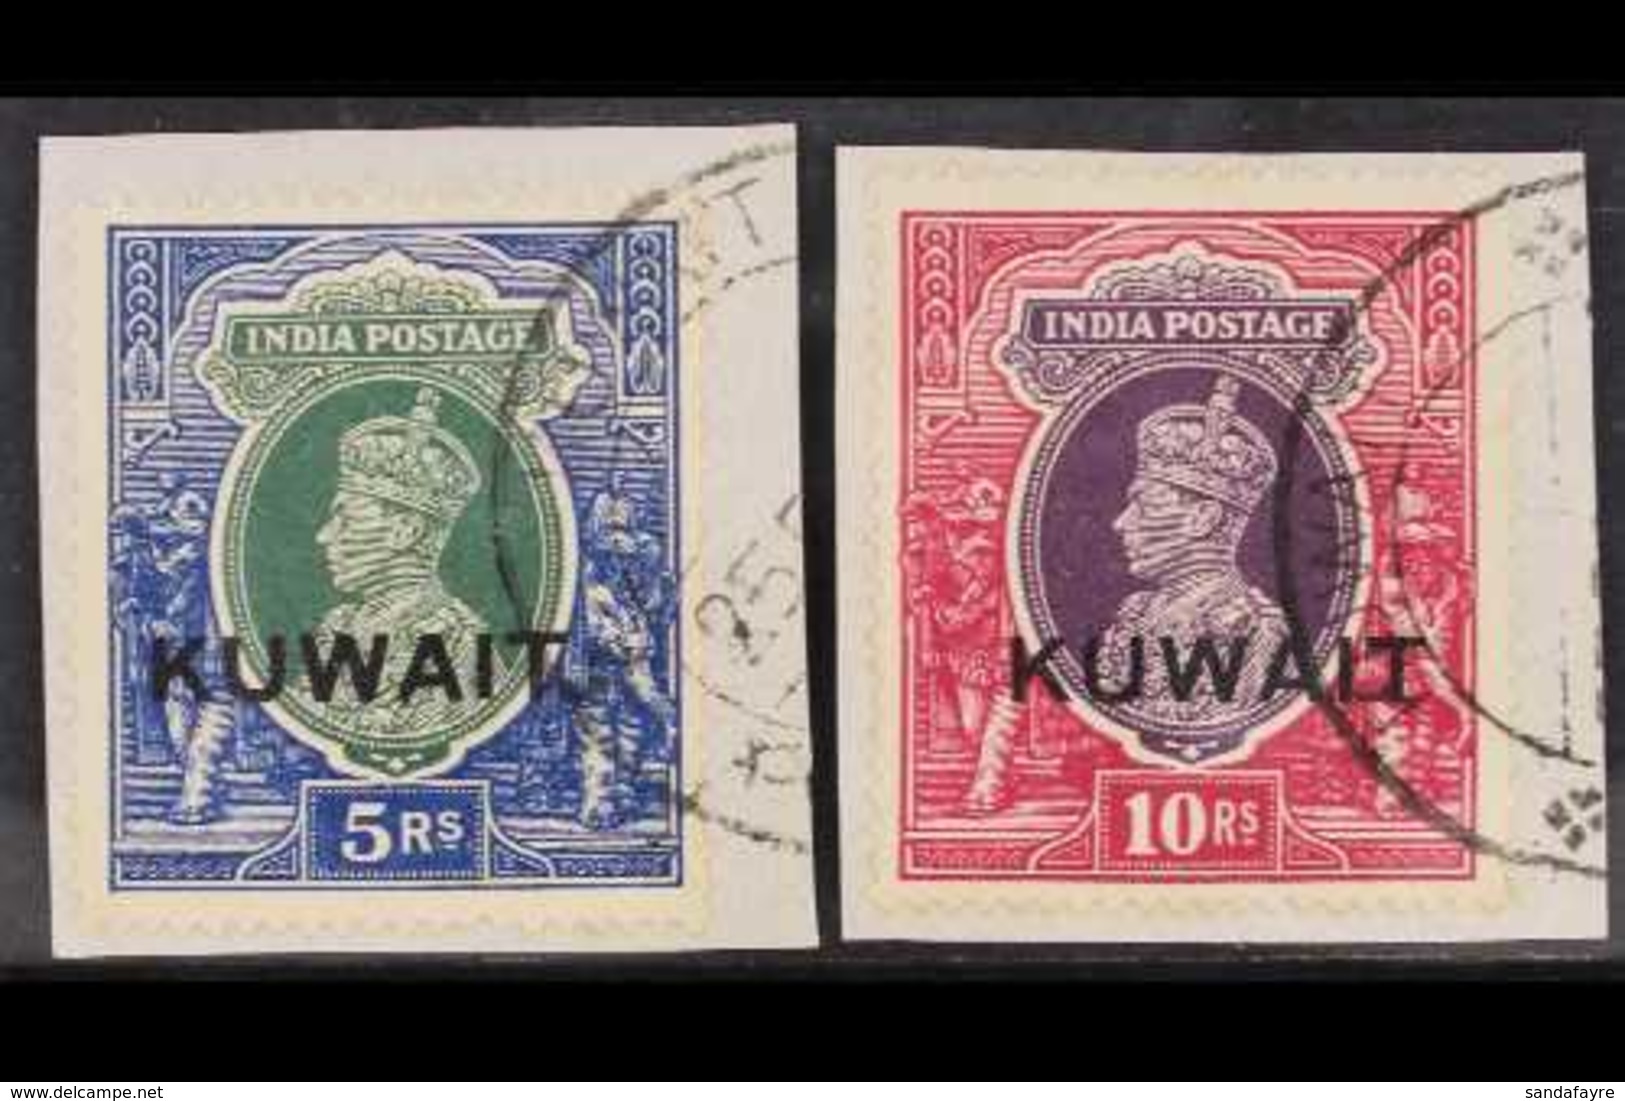 1939 5r And 10r King George VI Stamps Of India Overprinted "KUWAIT", SG 49/50, Each Very Fine Used On Piece. (2 Stamps)  - Kuwait